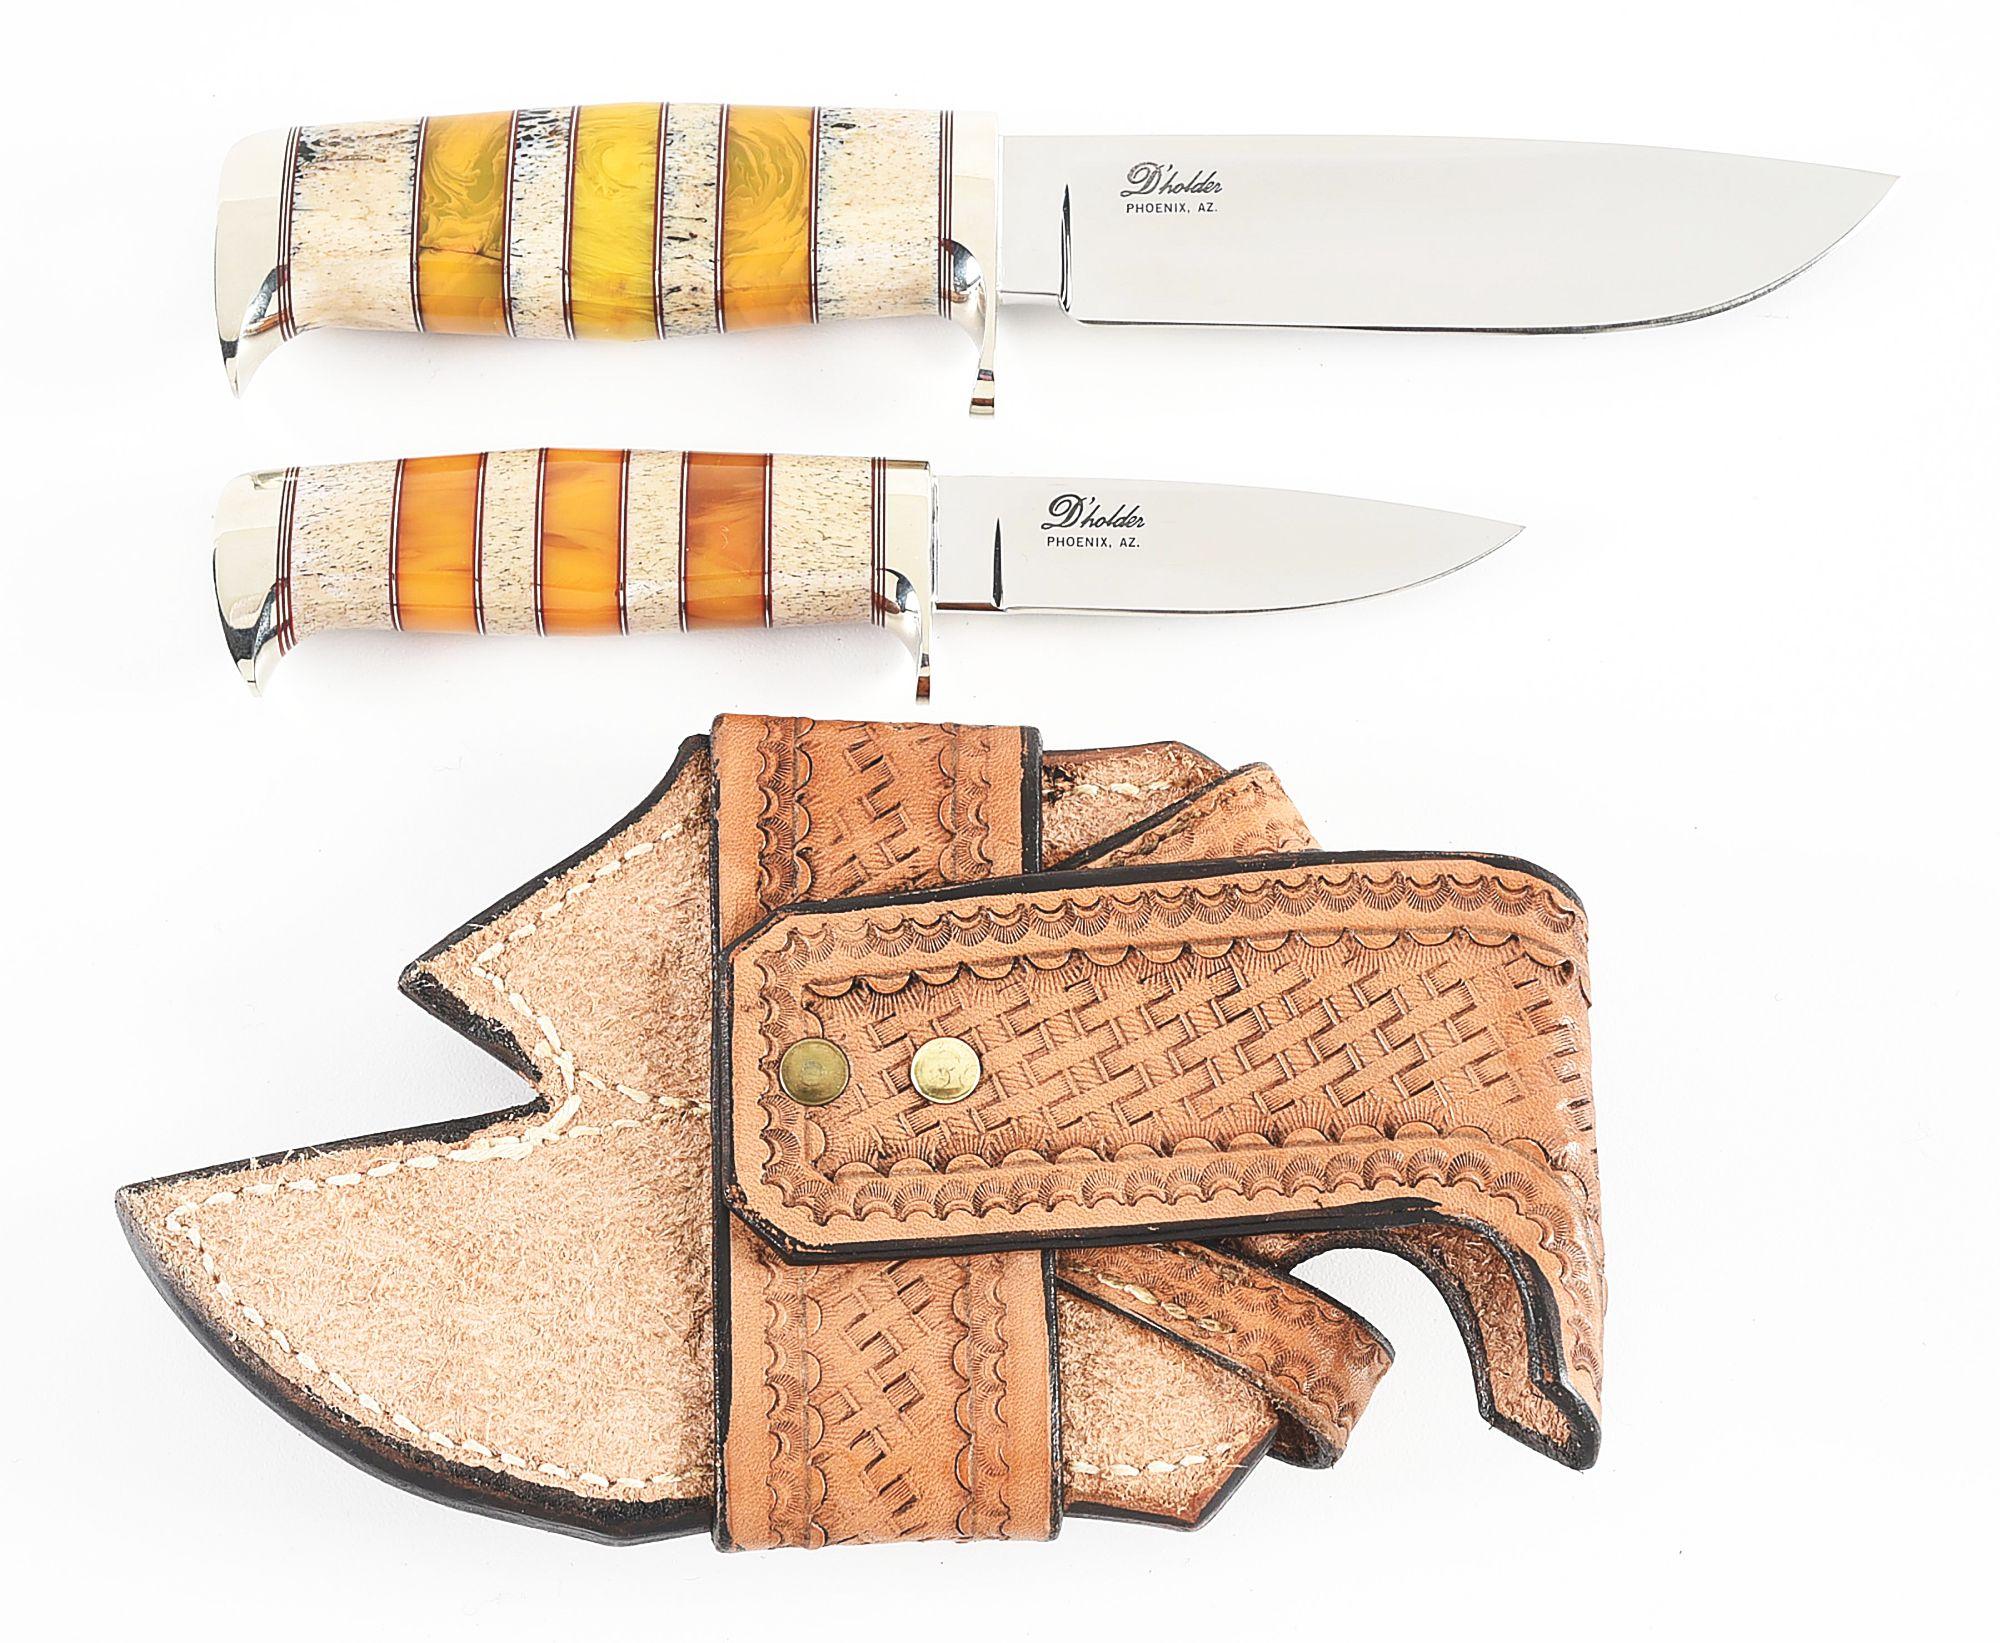 D'HOLDER CUSTOM KNIVES 2 KNIFE SET WITH TOOLED LEATHER DOUBLE SCABBARD.